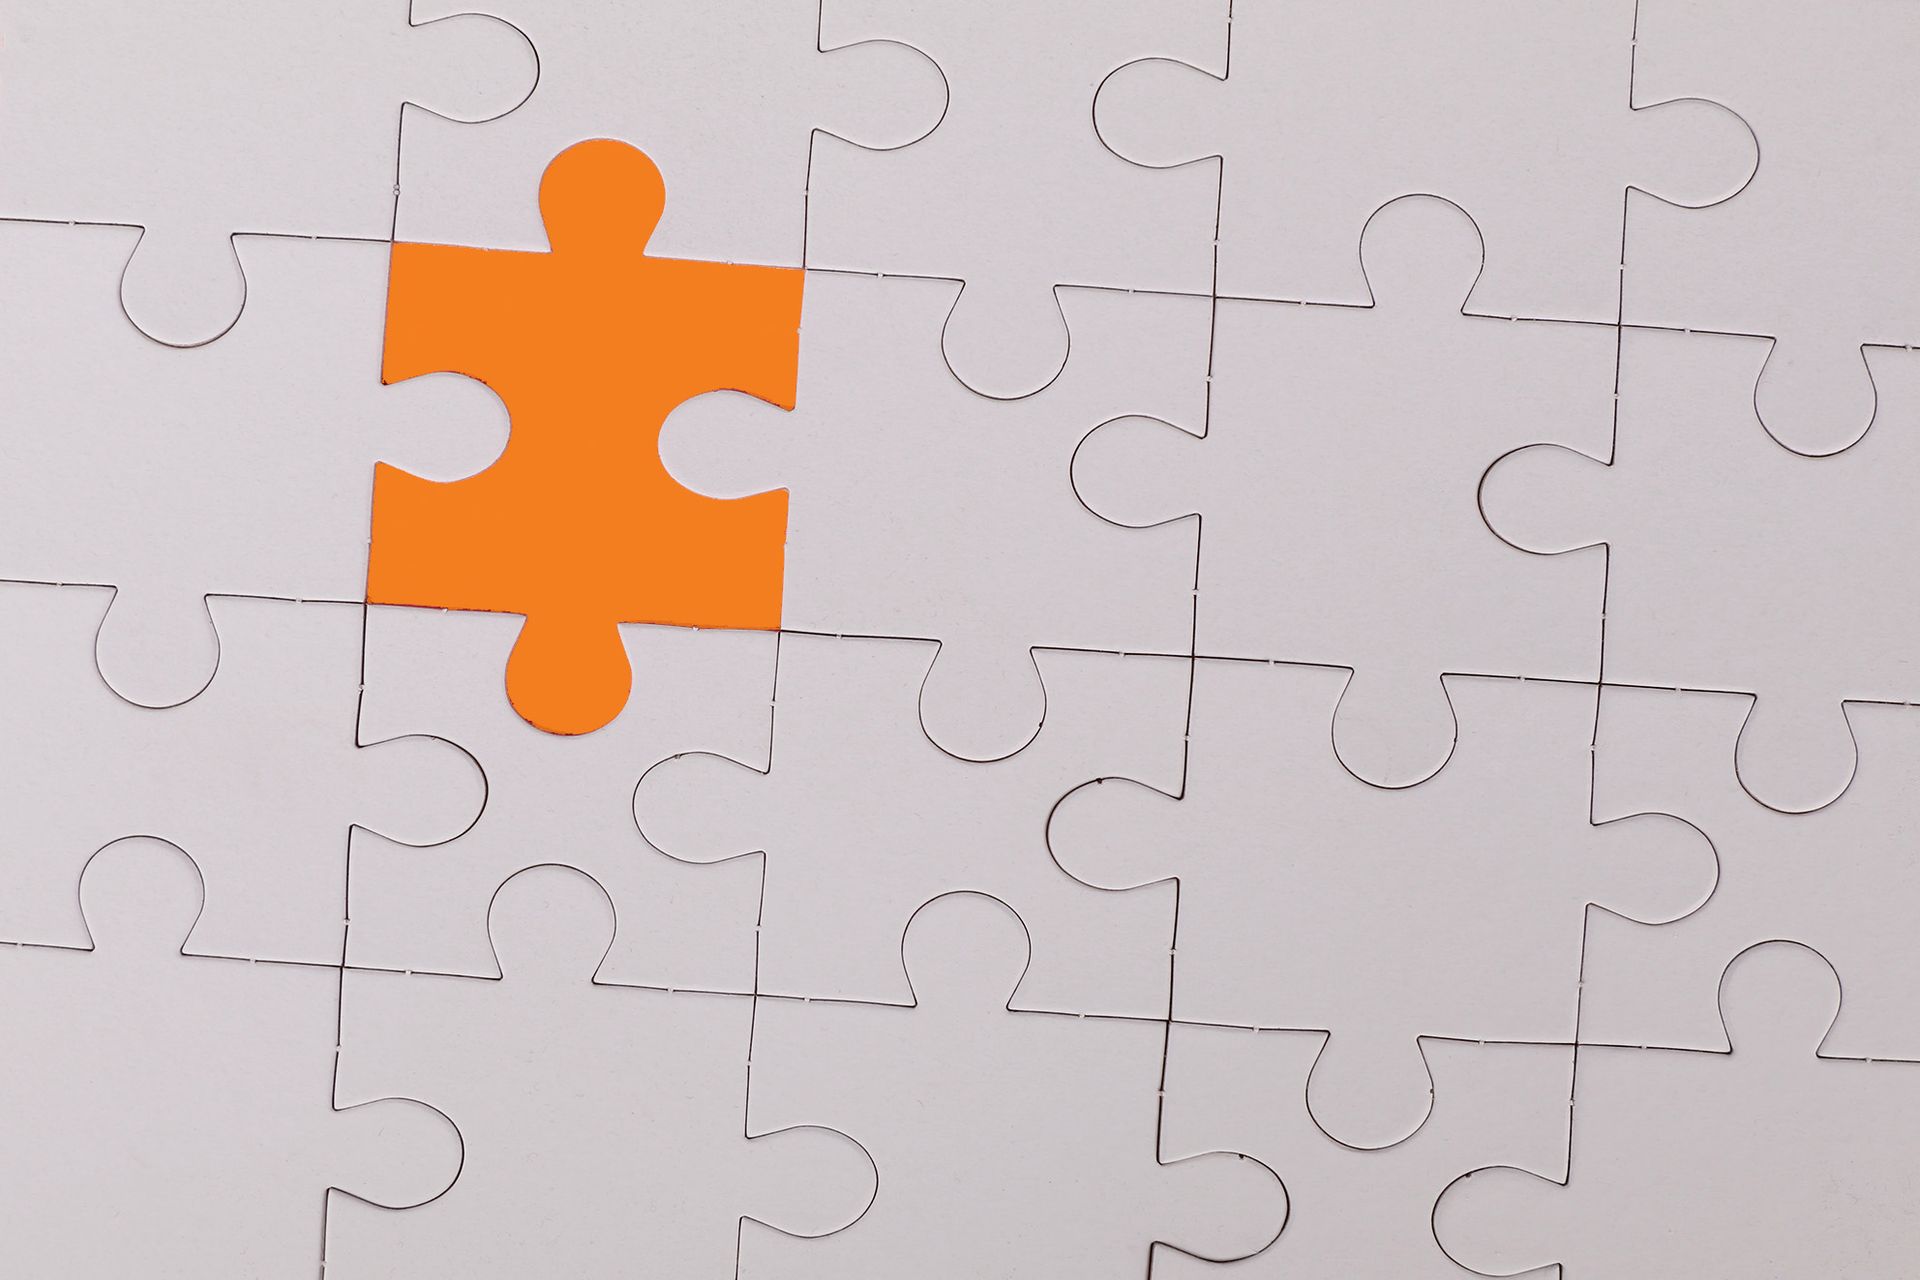 Search-based recruitment is kind of like finding that missing puzzle piece